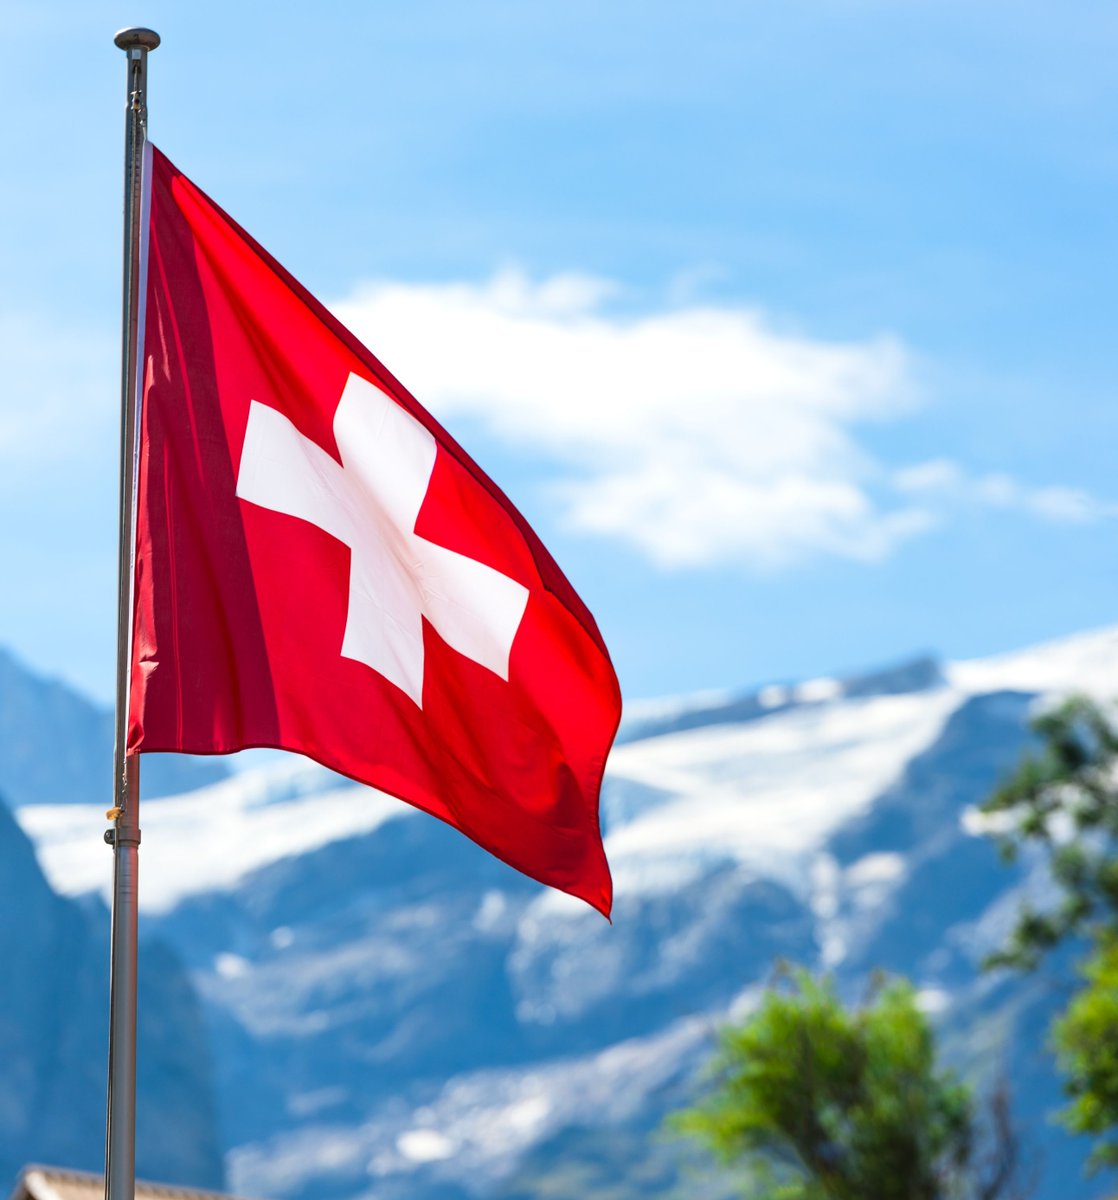 Jersey’s Swiss Community are invited to meet and greet the Ambassador of Switzerland, His Excellency Markus Leitner🇨🇭 ➡️ Thursday 7th March, 17:30 – 19:30 ➡️ Le Capelain Gallery, St Helier Town Hall Email london.events@eda.admin.ch to register. Please bring ID. @GlobalJerseyCI